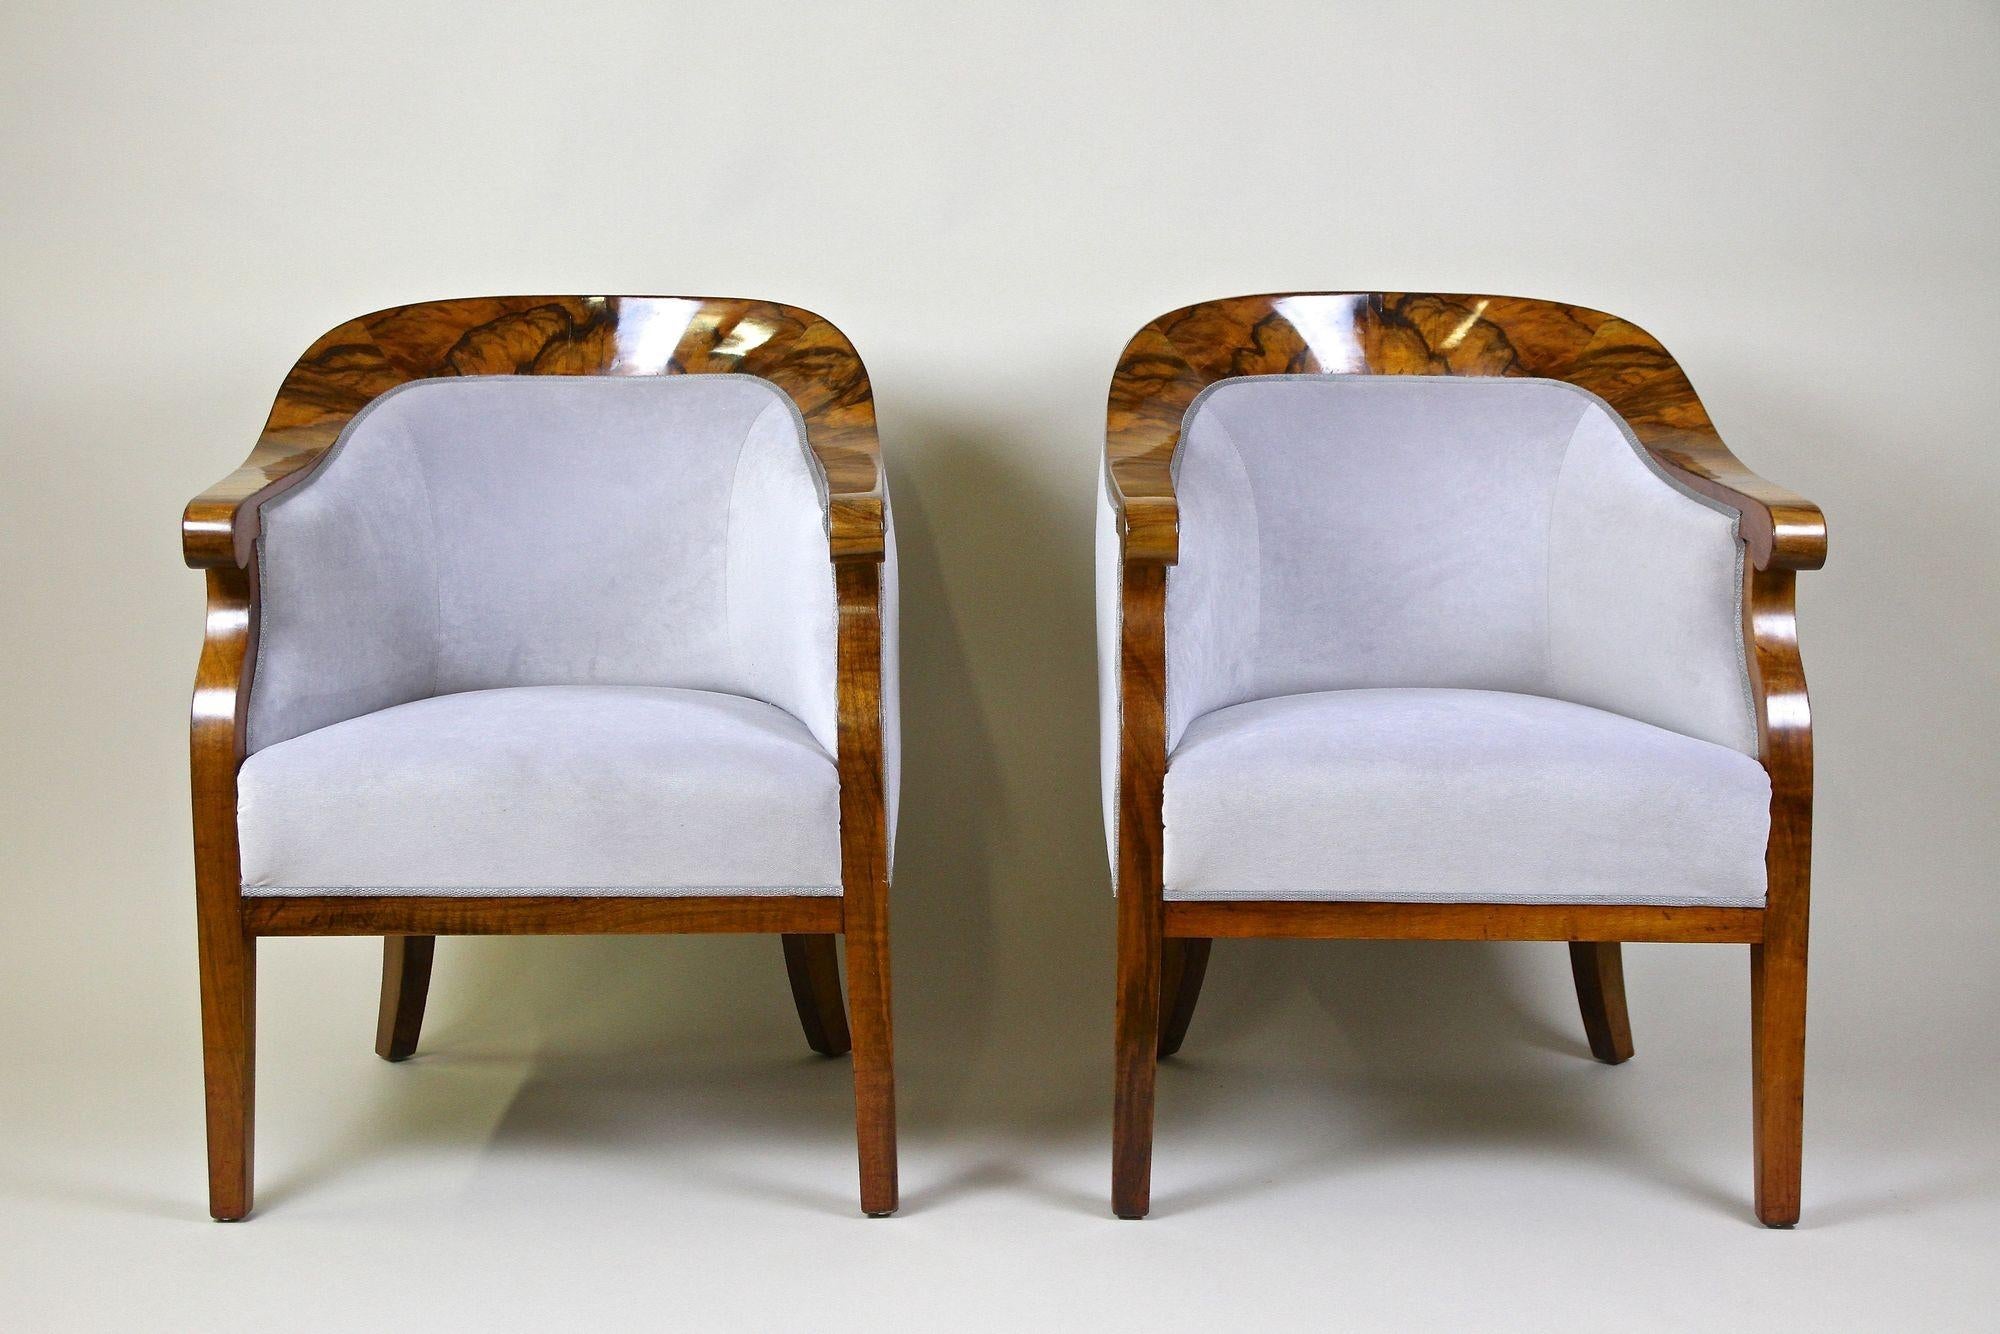 Absolute stunnning pair of 19th century nutwood Bergere chairs from the famous Biedermeier period in Vienna/ Austria around 1830. This remarkable set of rare Biedermeier armchairs has been elaborately restored in our restoration workshop. Impressing